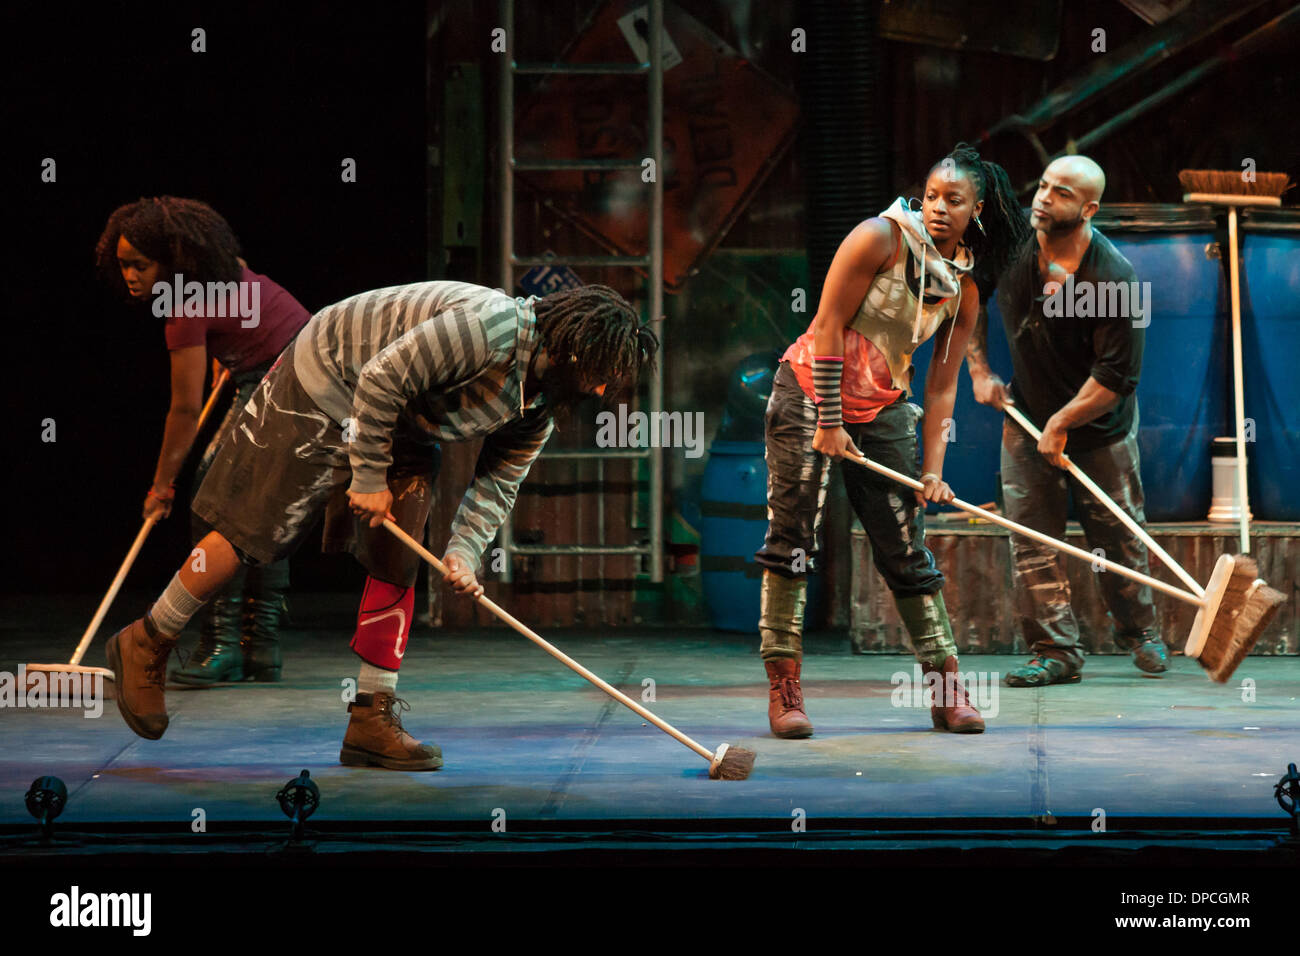 Stomp, the percussion musical that originated in Brighton, England, performs in London Ontario, Canada on March 11, 2014. The musical act uses ordinary objects and individual movements to create a 'physical theatre' performance. Stock Photo